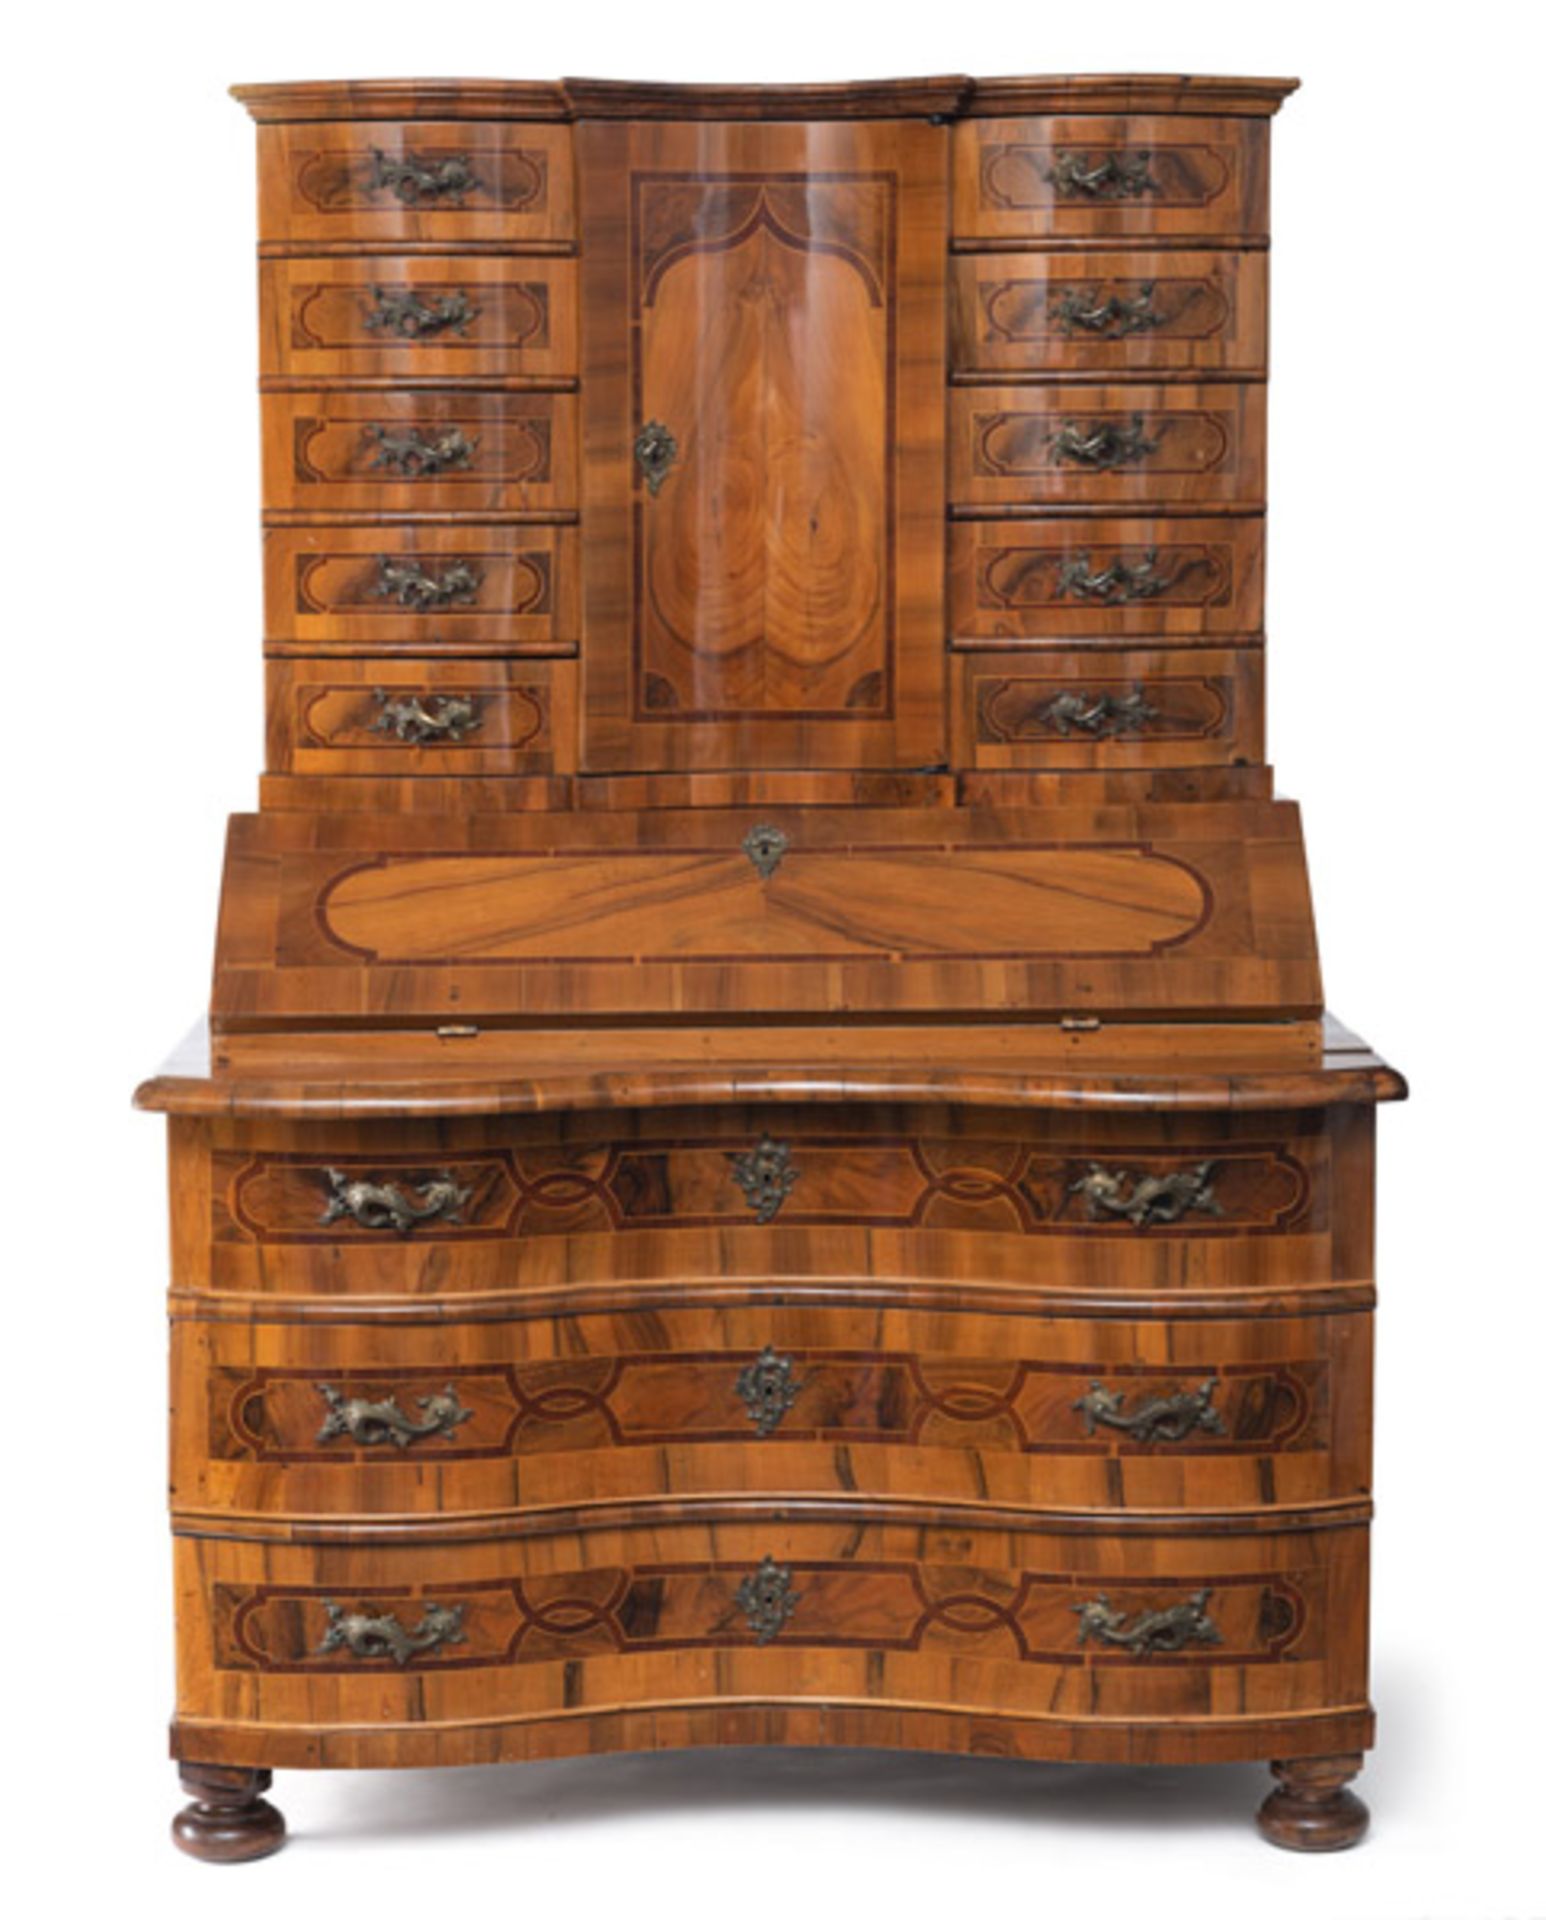 A GERMAN BRASS MOUNTED WALNUT AND PLUM BUREAU CABINET A-TROIS-CORPS - Image 2 of 8